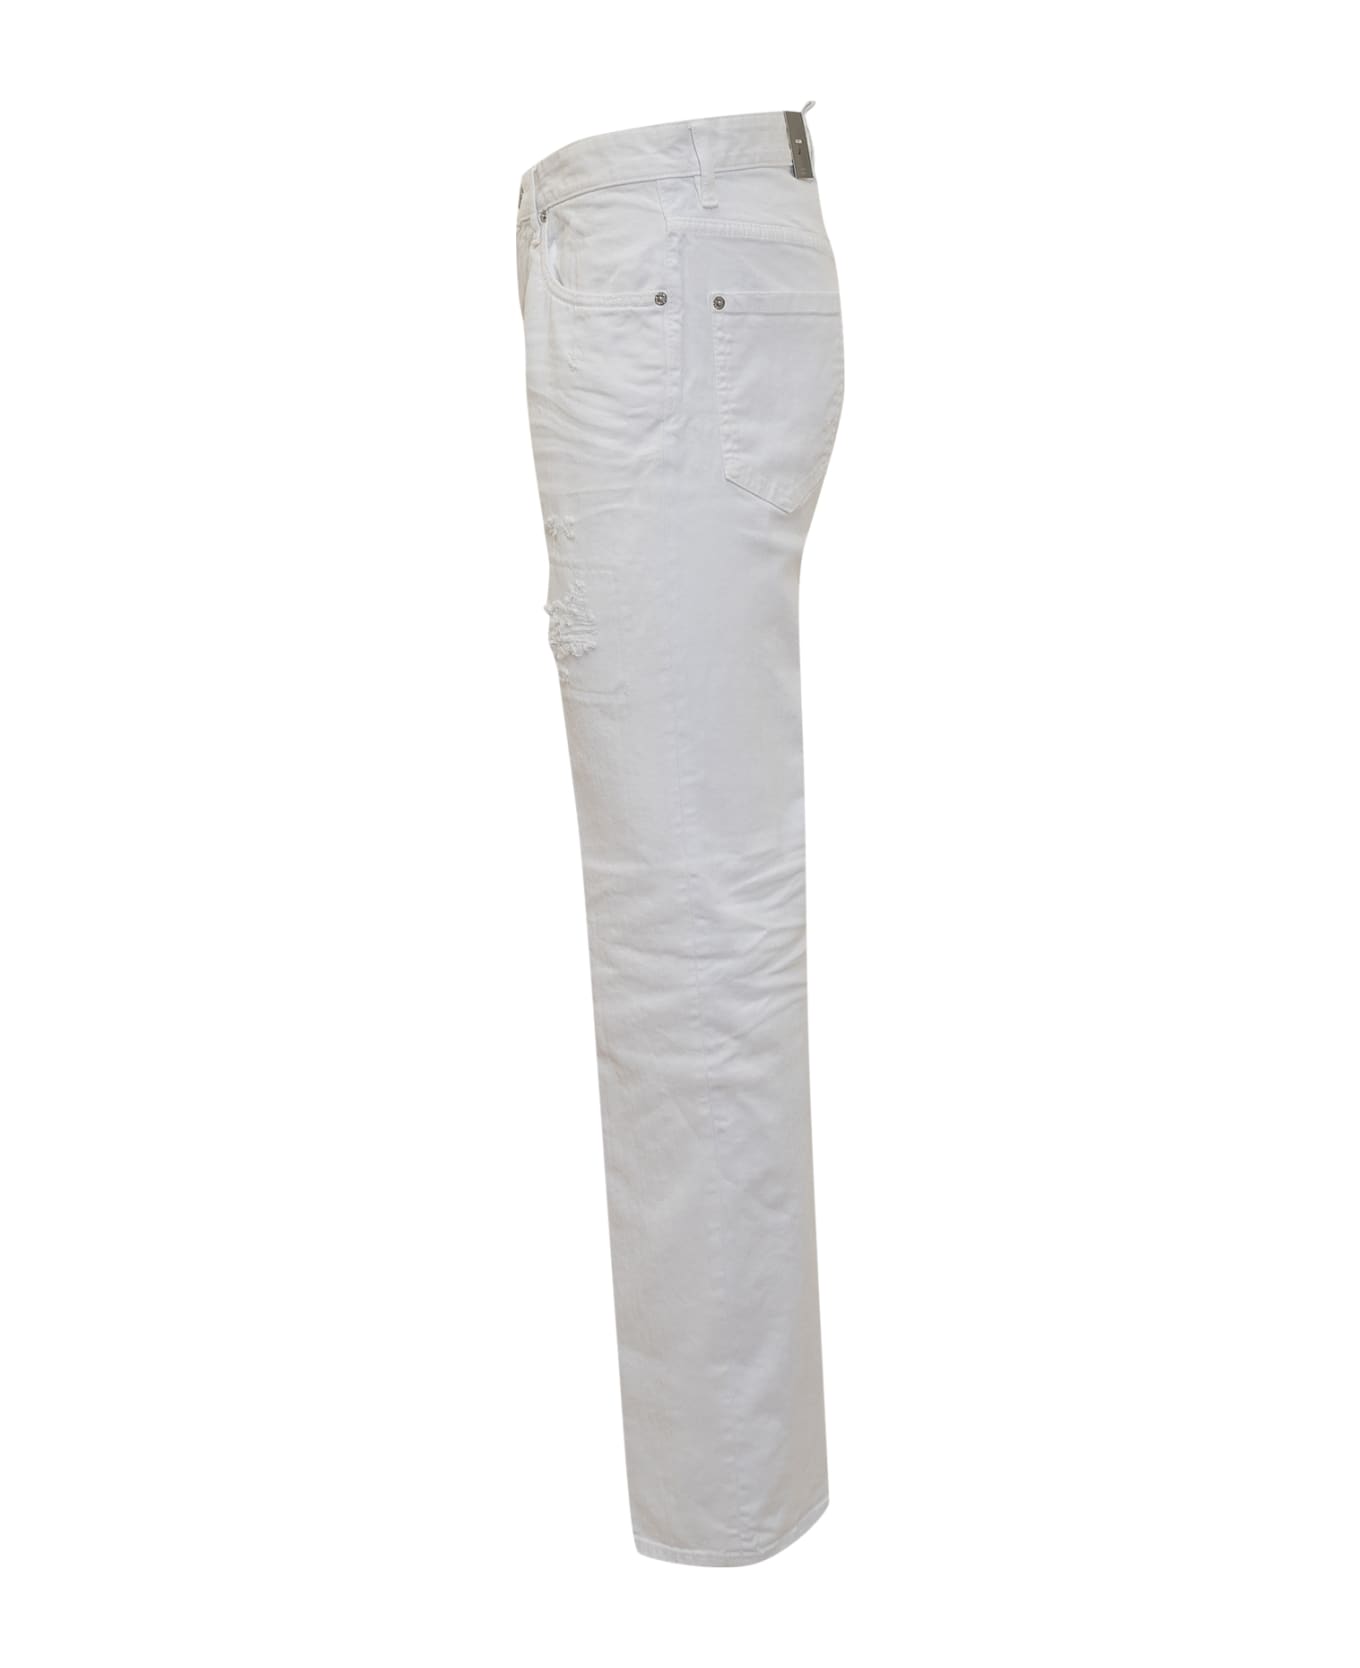 Dsquared2 Jeans - WHITE